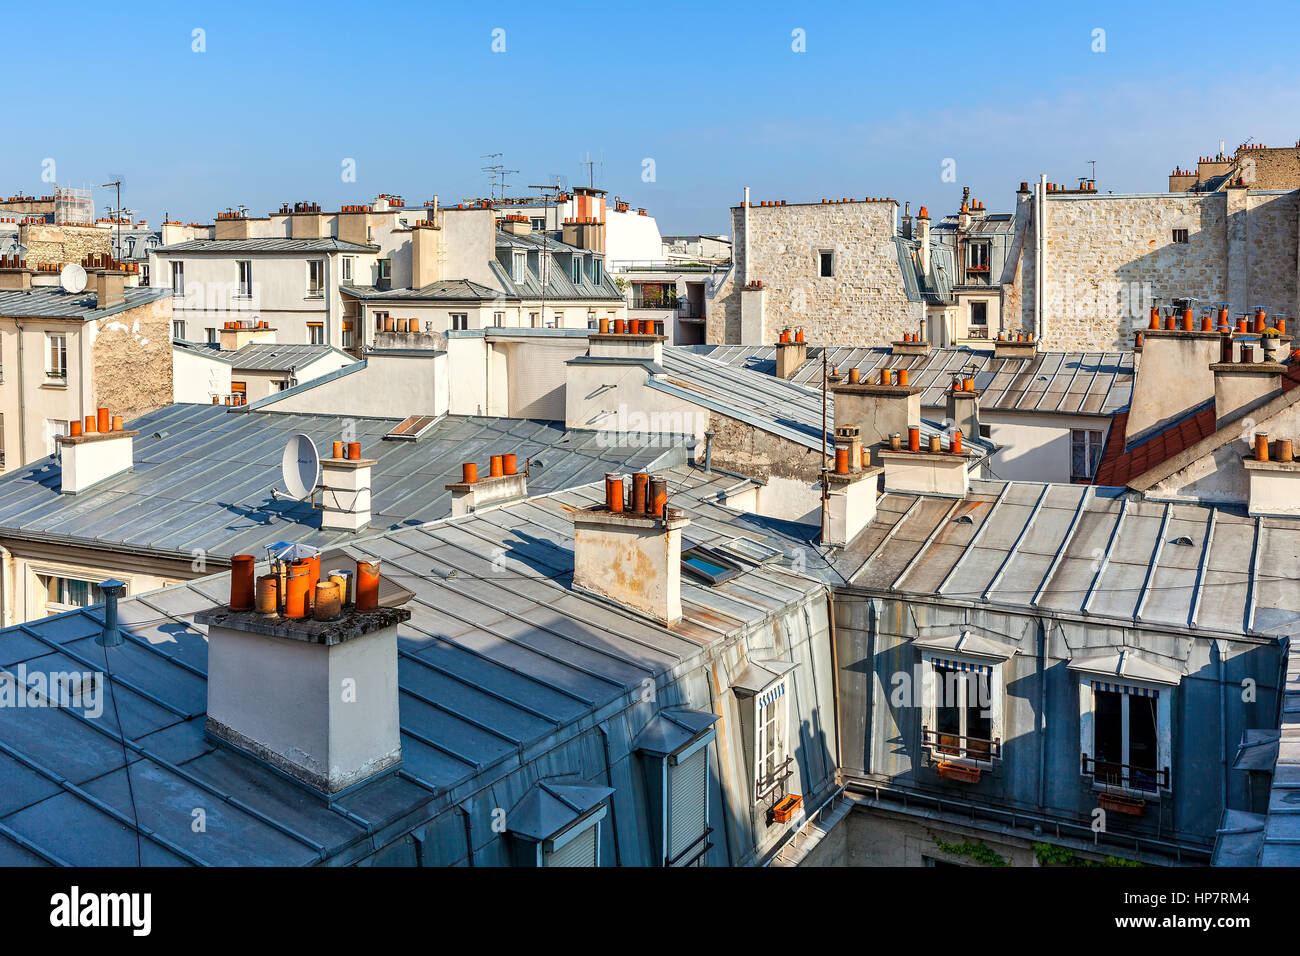 View of typical parisian roofs with mansards and chimneys in Paris, France. Stock Photo